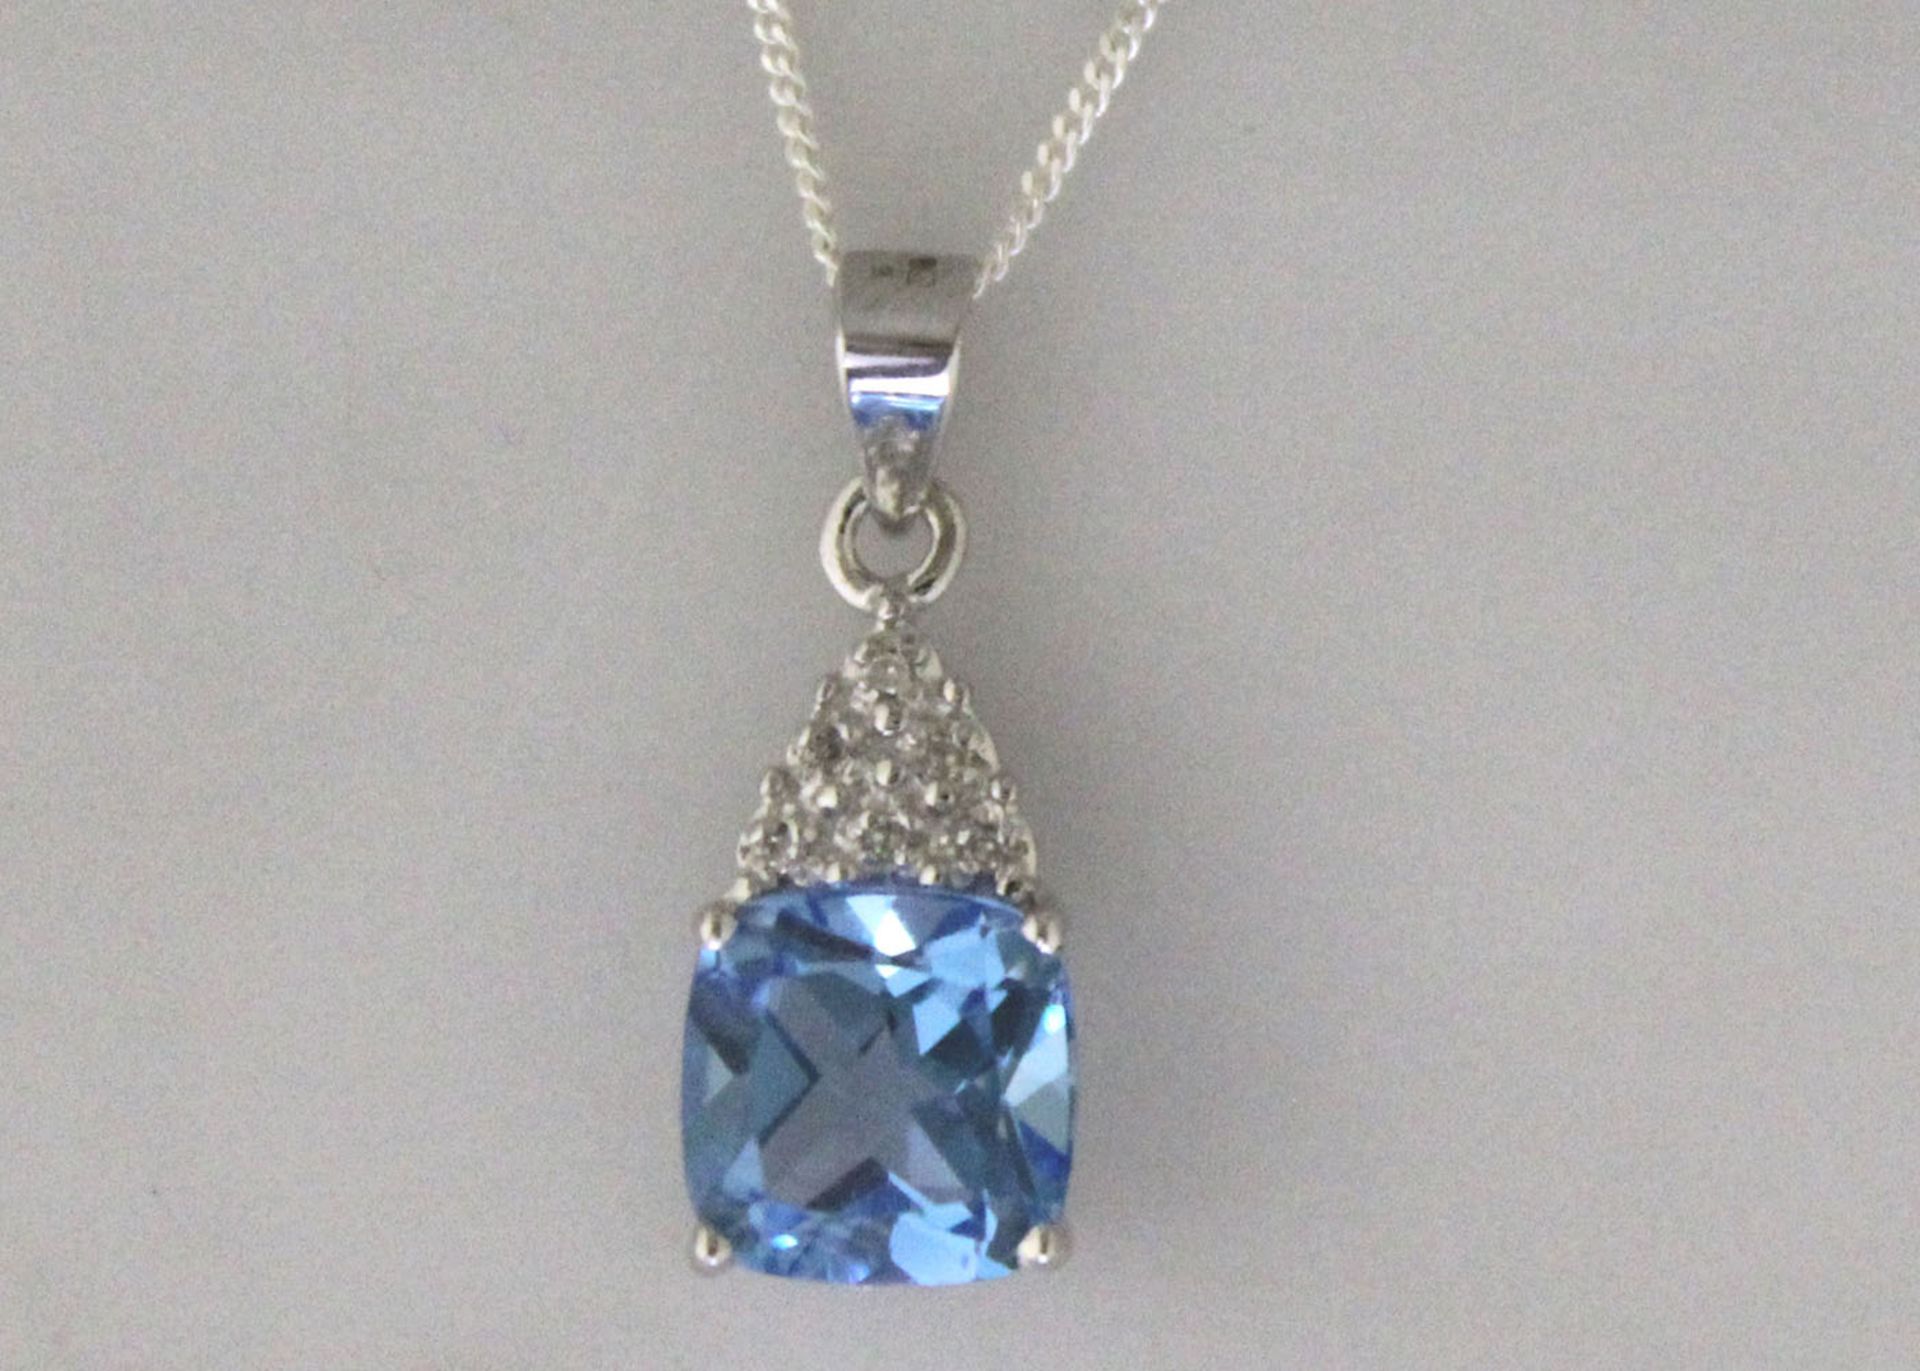 9ct White Gold Diamond And Blue Topaz Pendant 0.02 Carats - Valued by GIE £727.50 - A gorgeous - Image 5 of 6